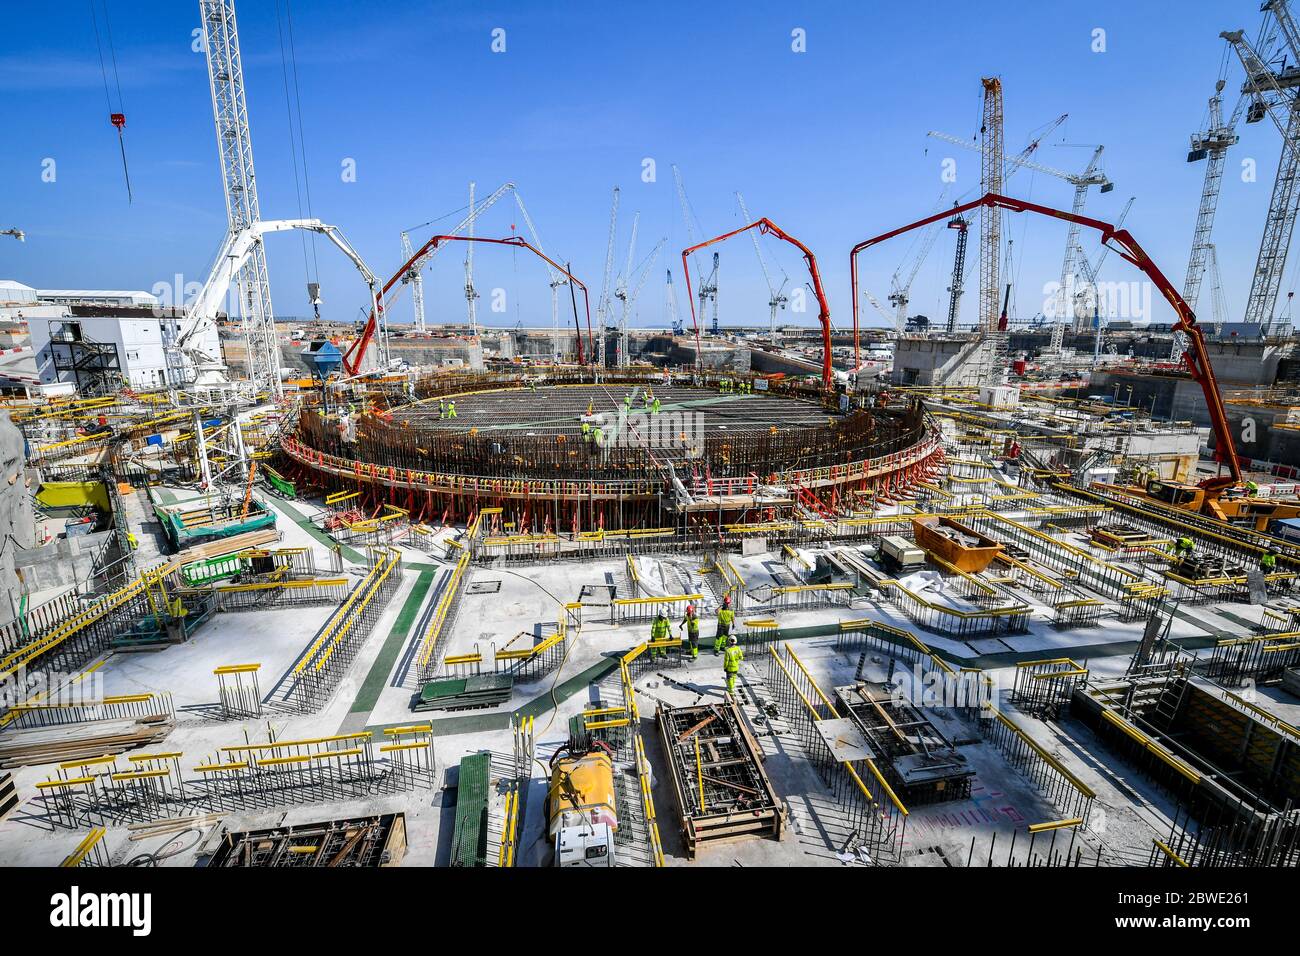 Construction workers and huge concrete pumping arms fill the reinforced steel base of unit 2 nuclear reactor at Hinkley Point C nuclear power station near Bridgwater, Somerset, Europe's largest building site. Stock Photo